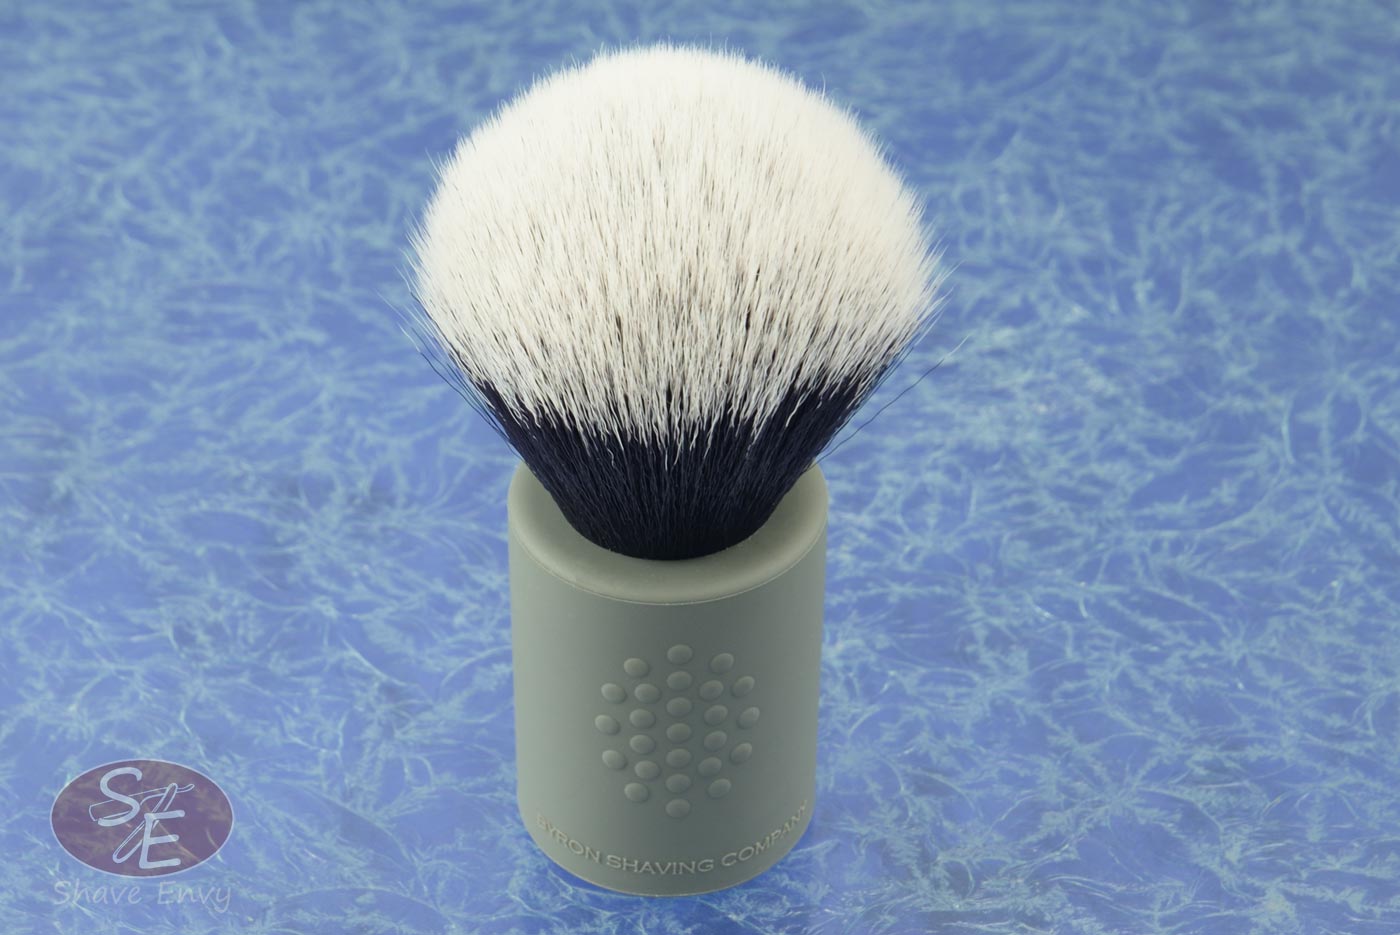 Shaving Brush with Grey Silicon Rubber, Synthetic Bristles